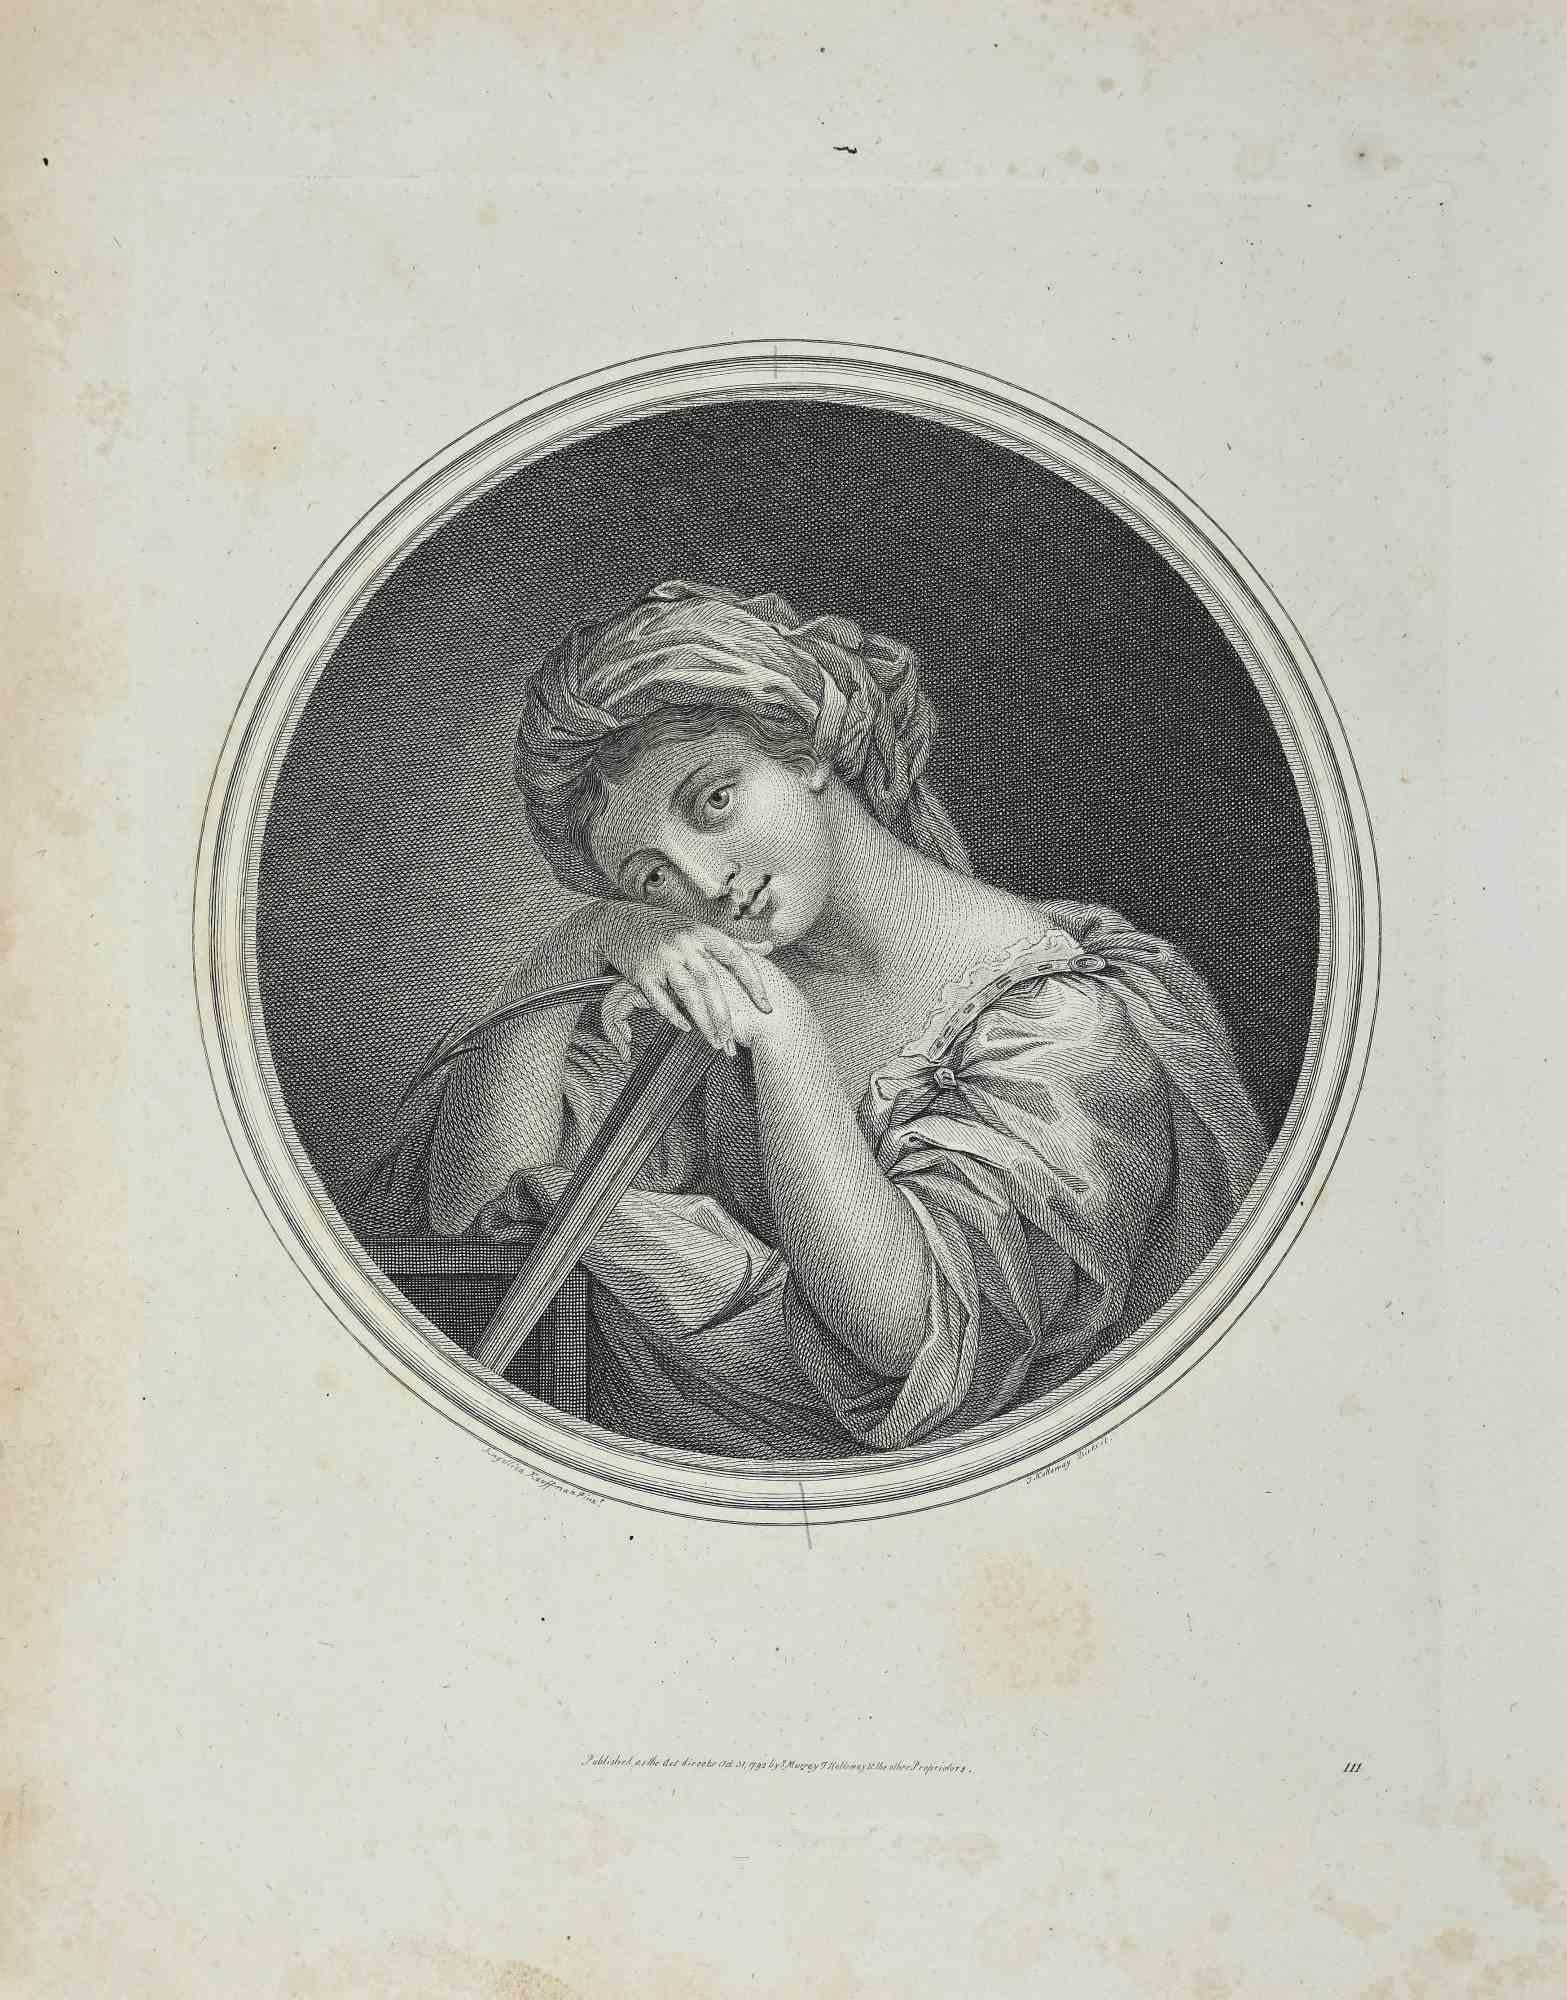 Portrait of Woman is an original artwork realized by Thomas Holloway (1748 - 1827).

Original Etching from J.C. Lavater's "Essays on Physiognomy, Designed to promote the Knowledge and the Love of Mankind", London, Bensley, 1810. 

A the bottom